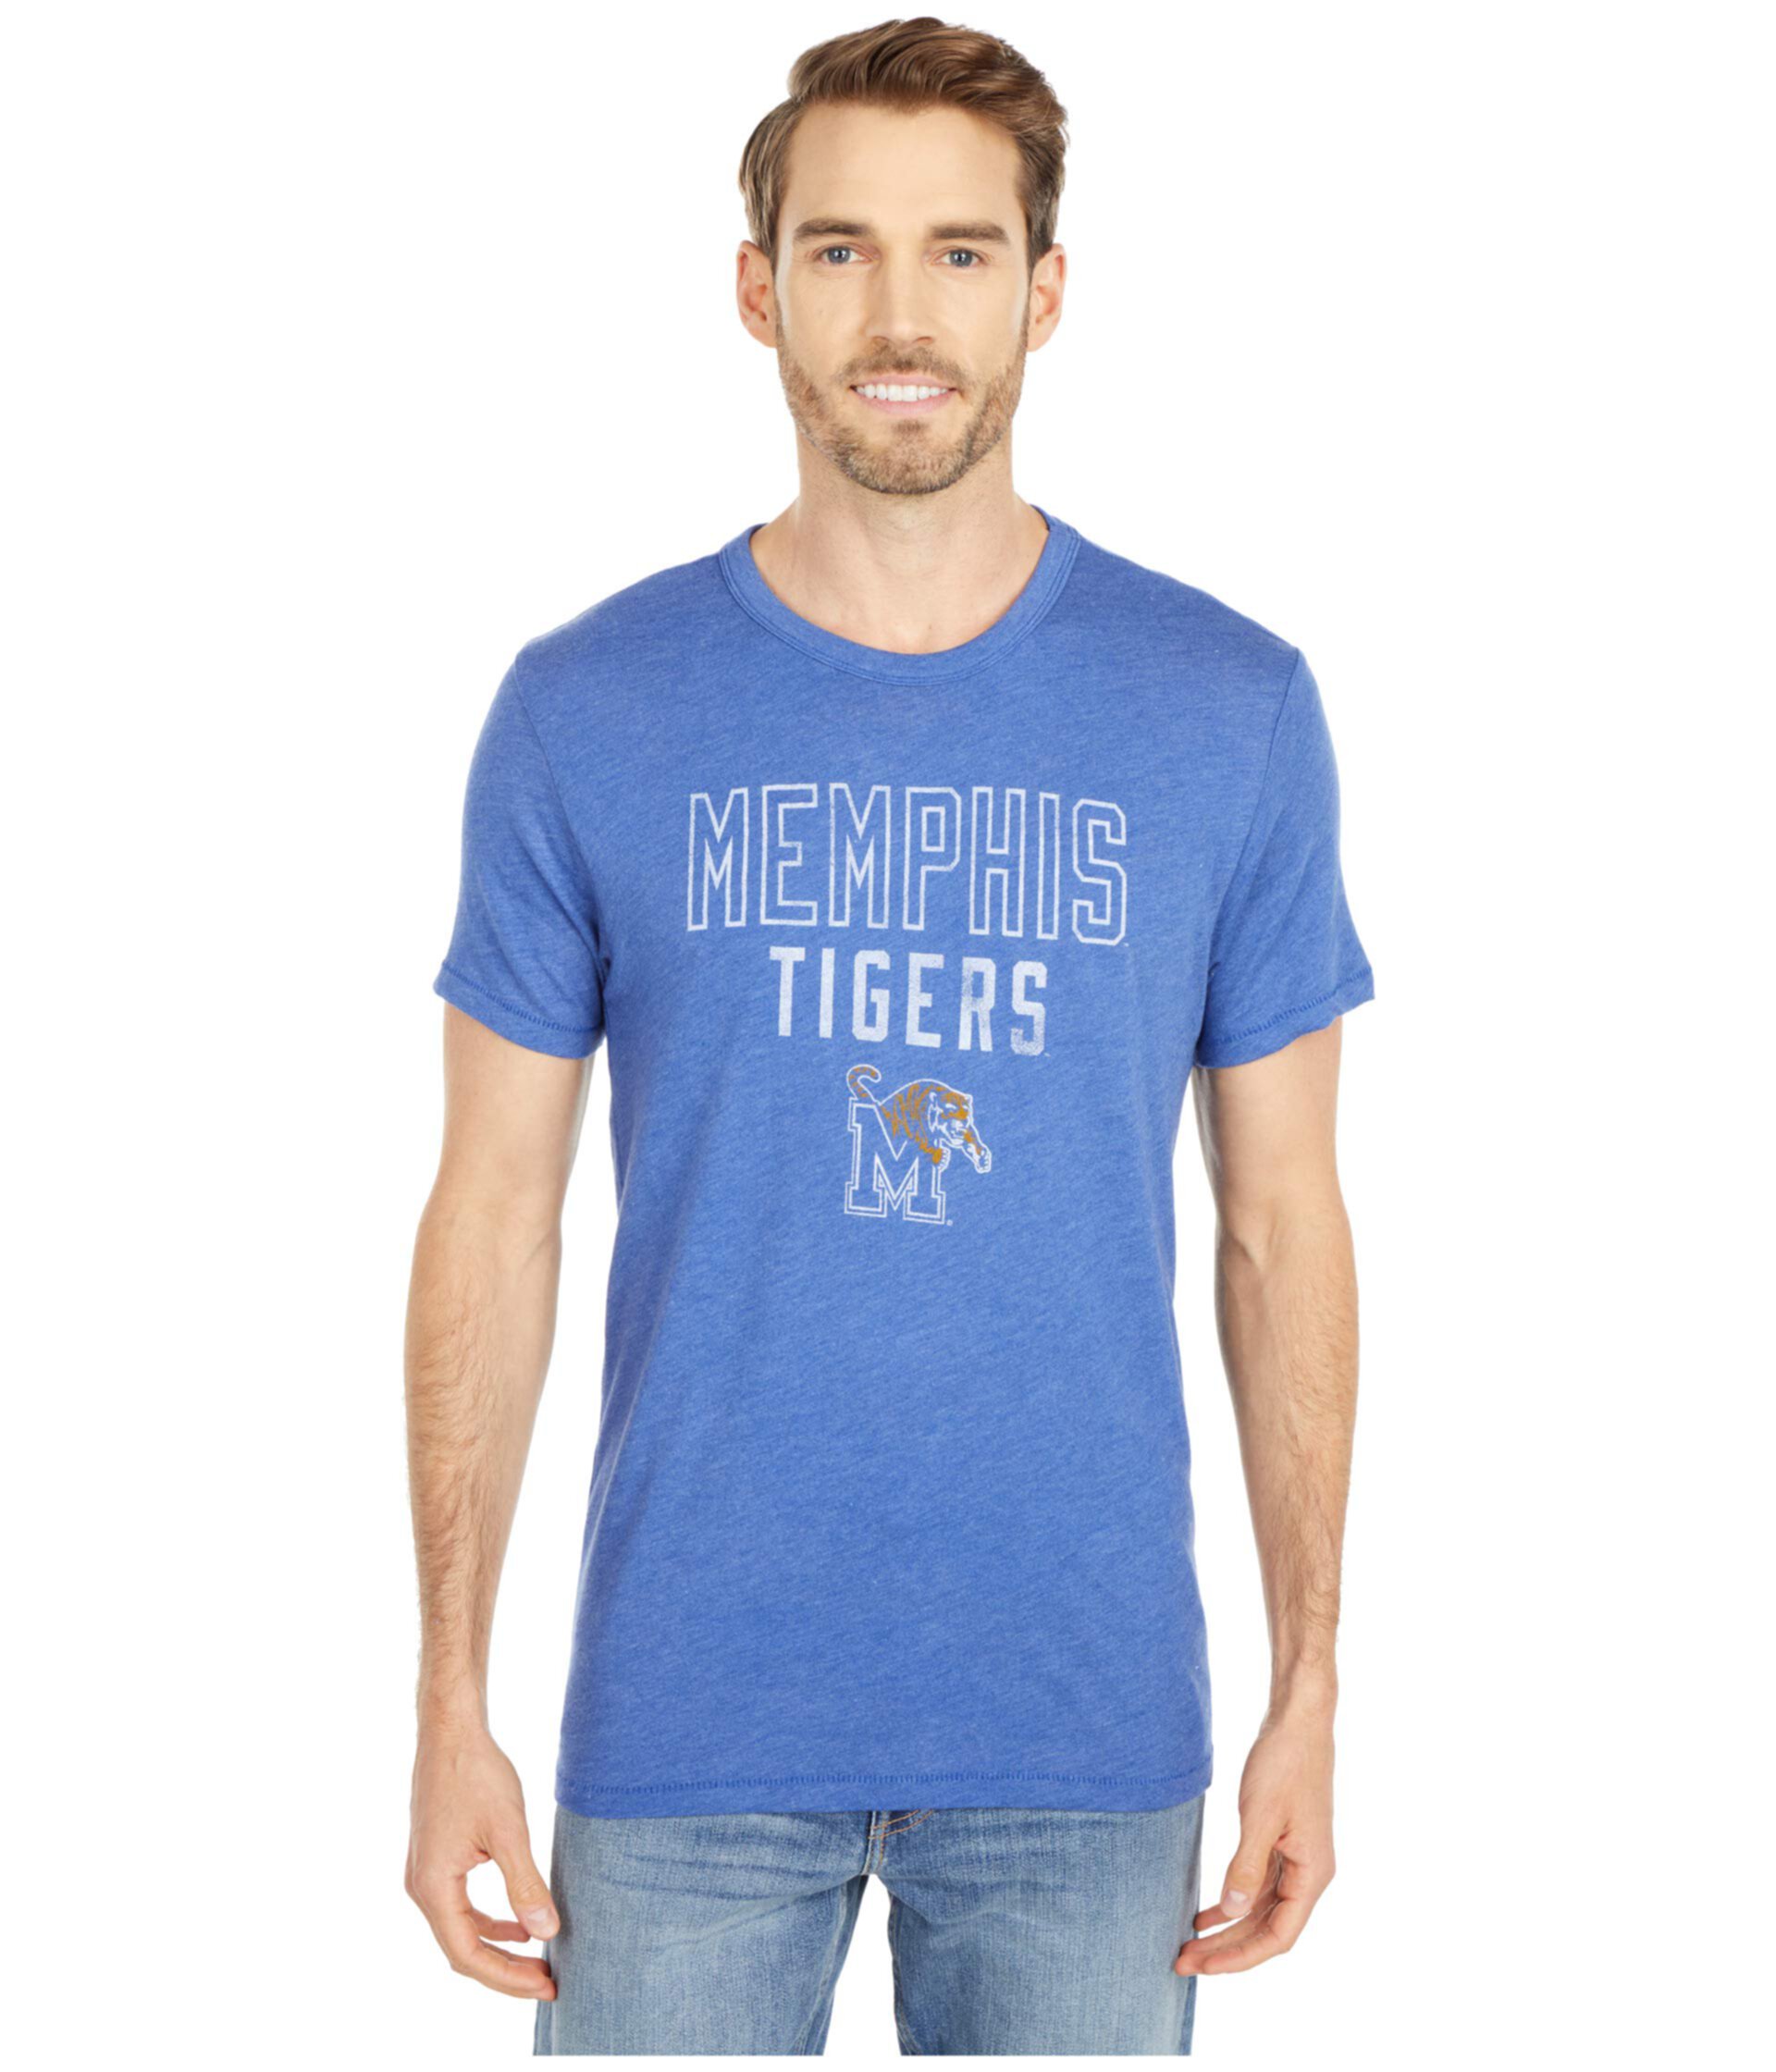 Temphers Tigers Keeper Tee Champion College